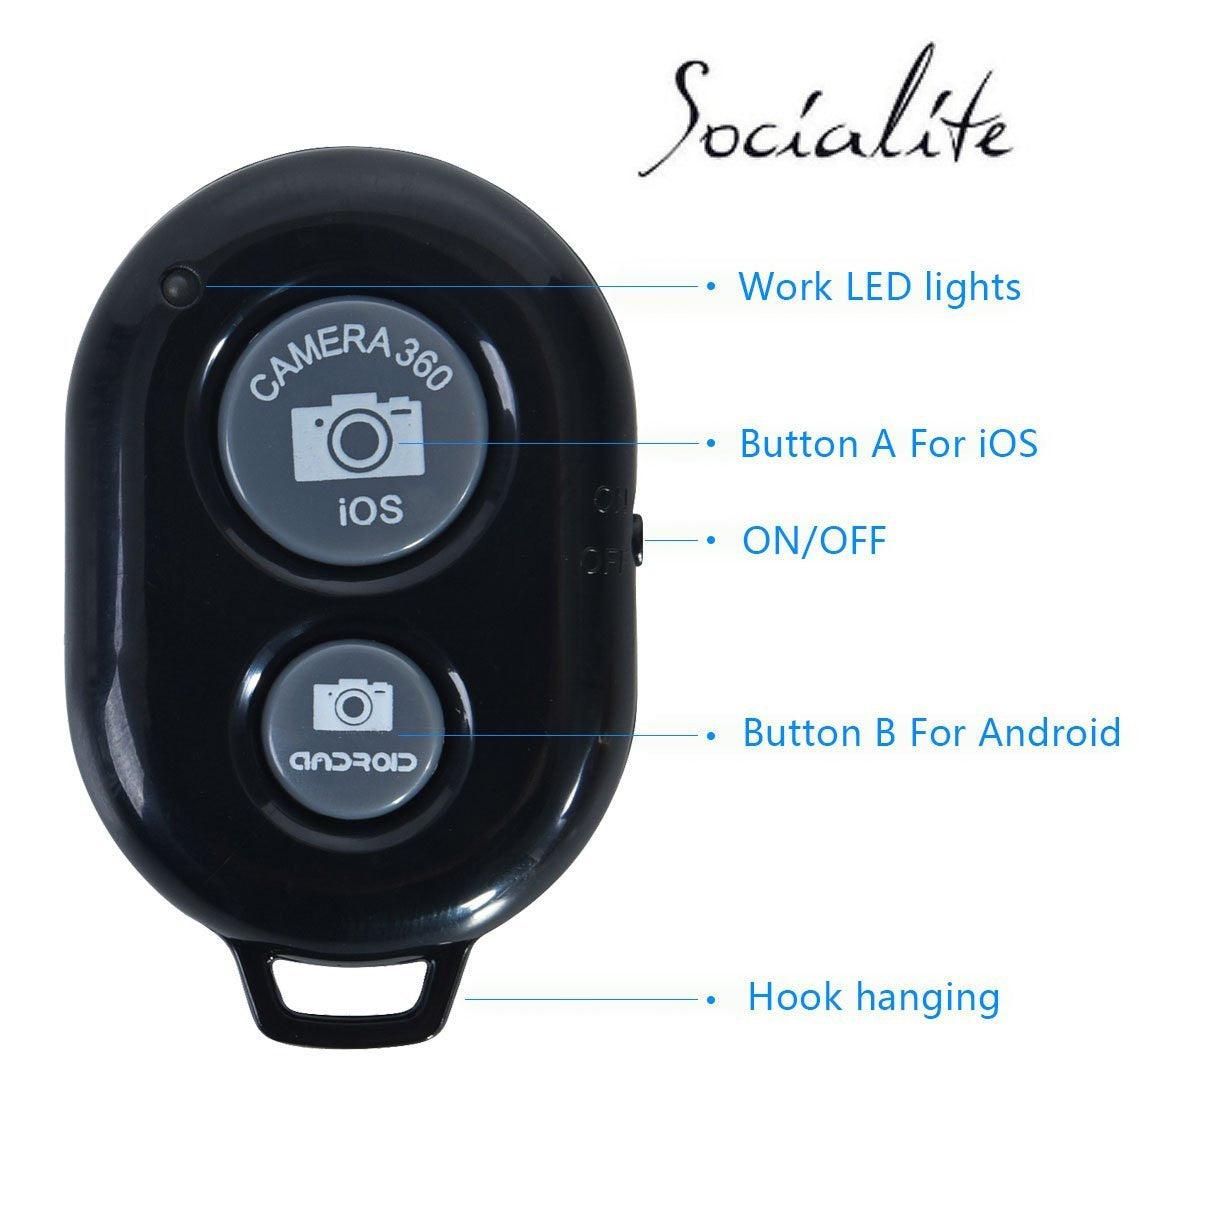 Bluetooth remote button features